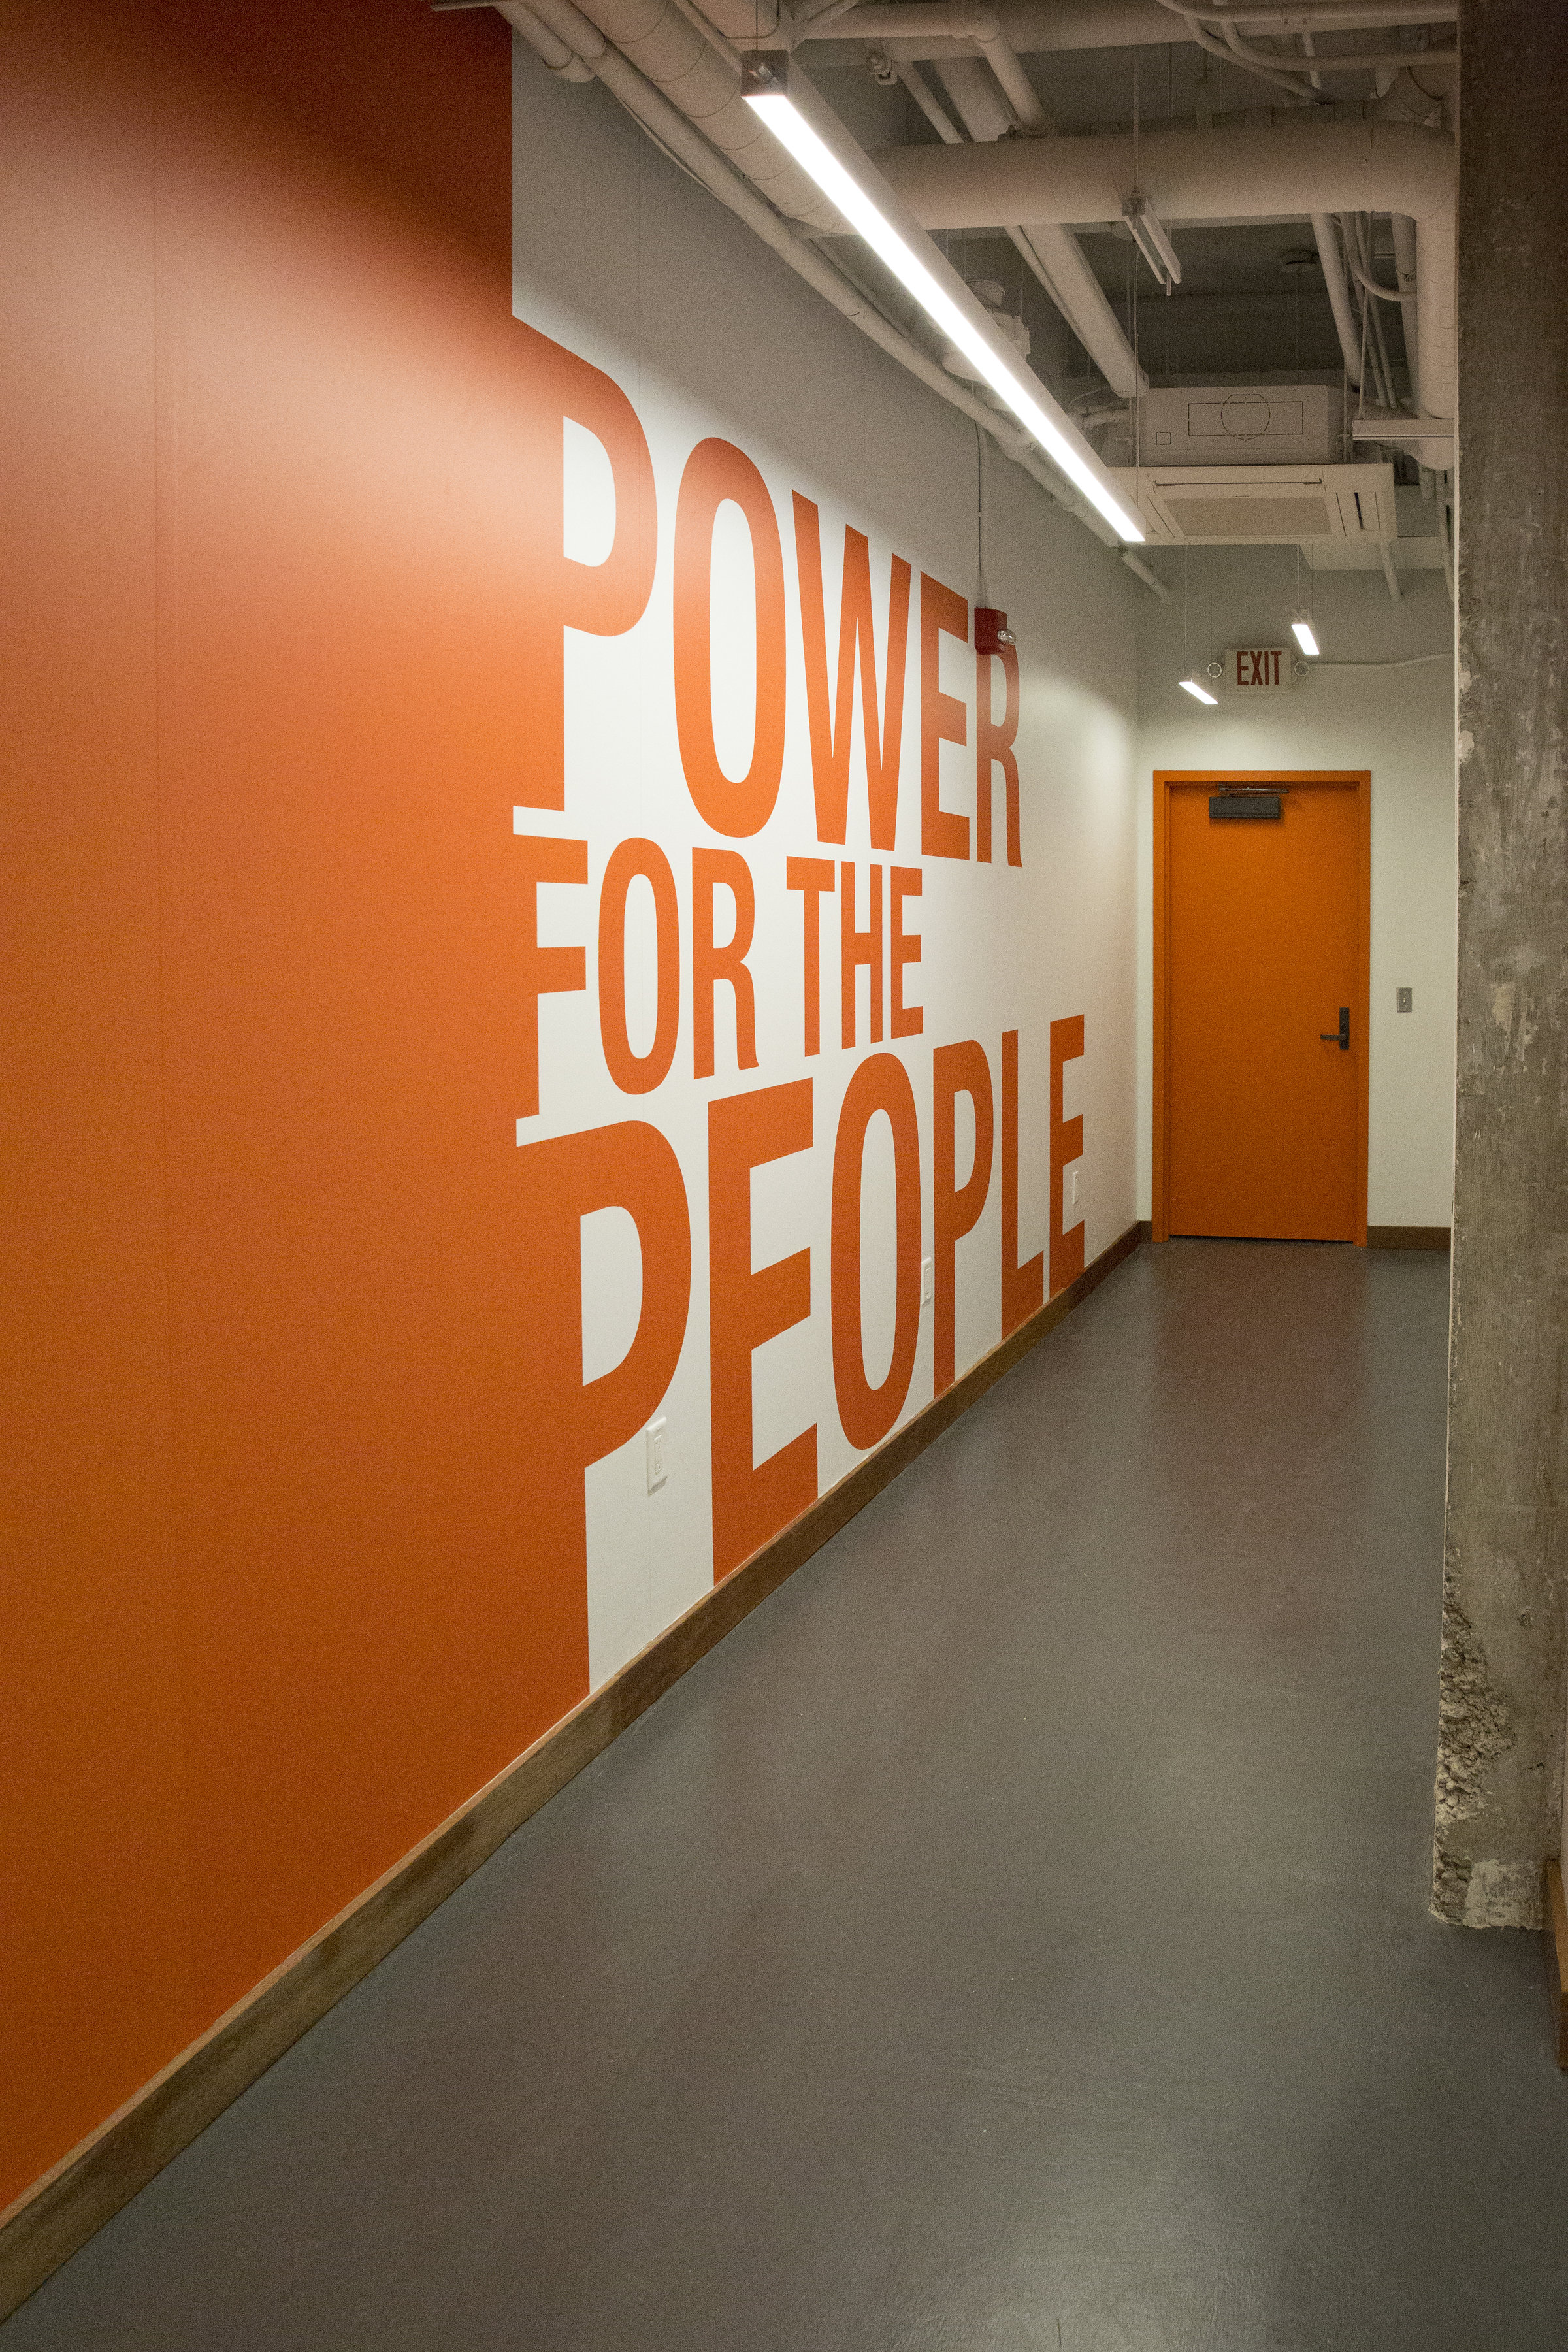 RevoluSun Smart Home Innovation Center Showroom - Power for the People